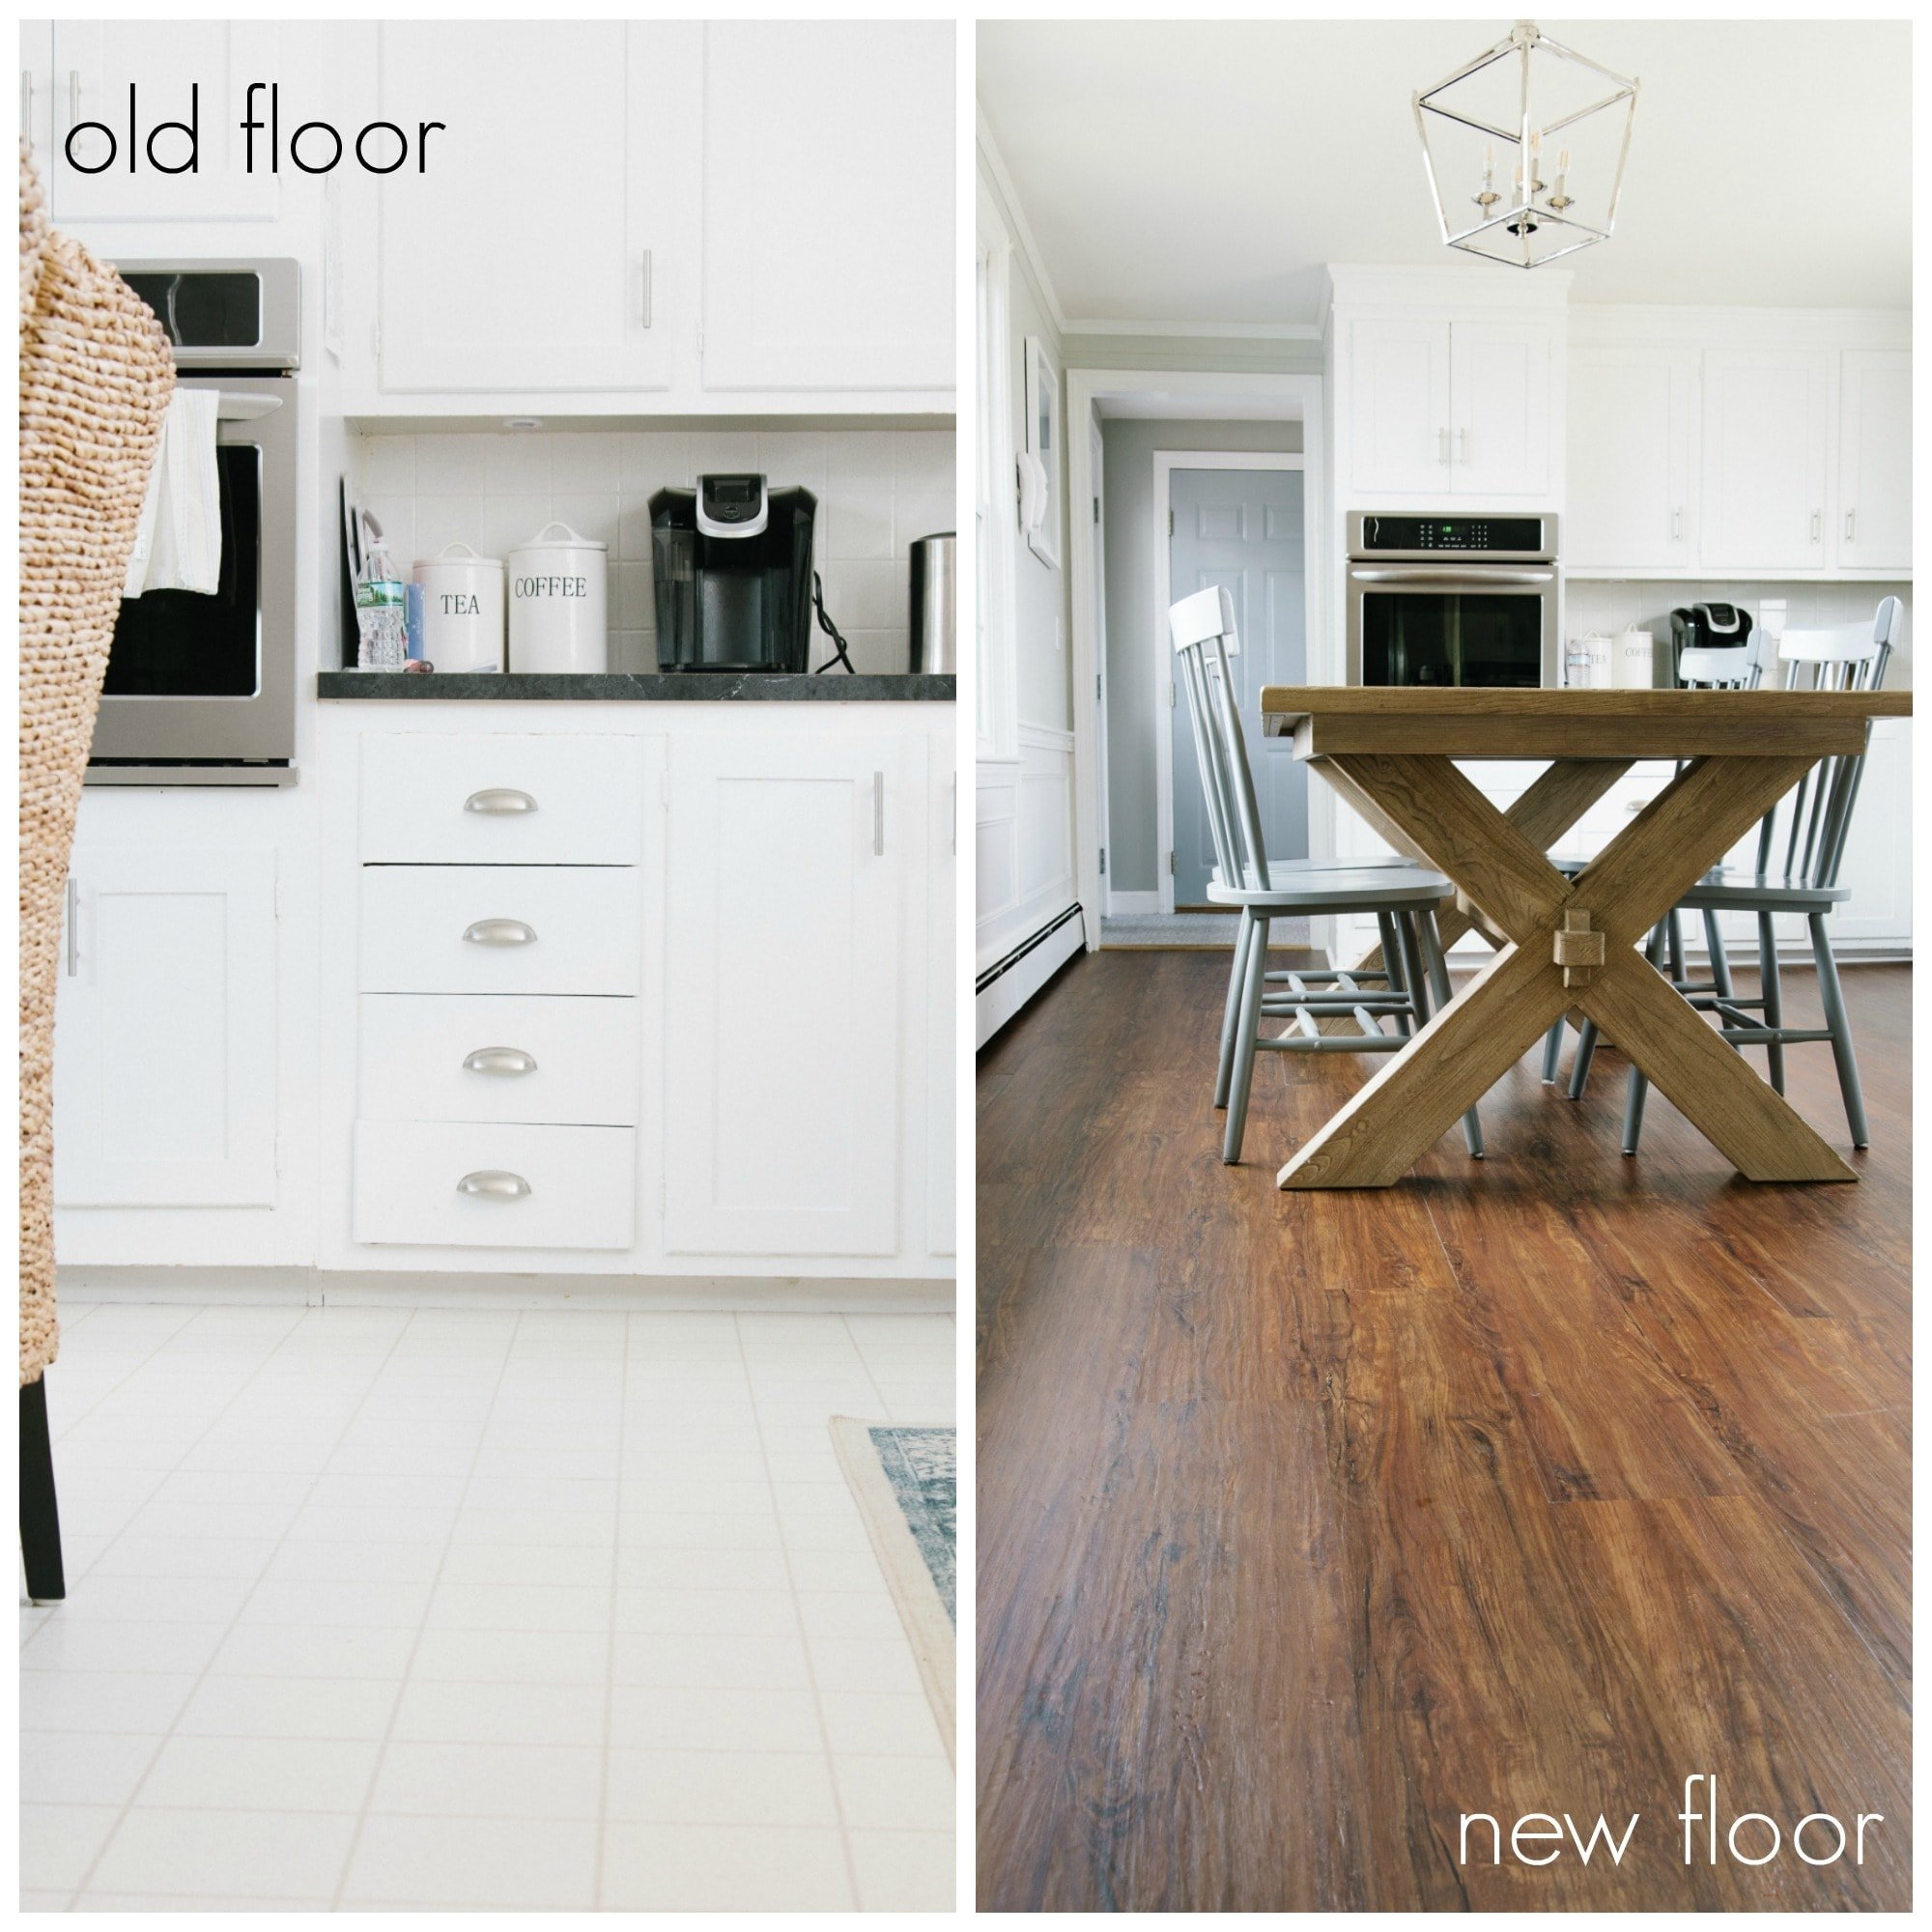 How to Install Luxury Vinyl Plank Flooring - Jenna Kate at Home